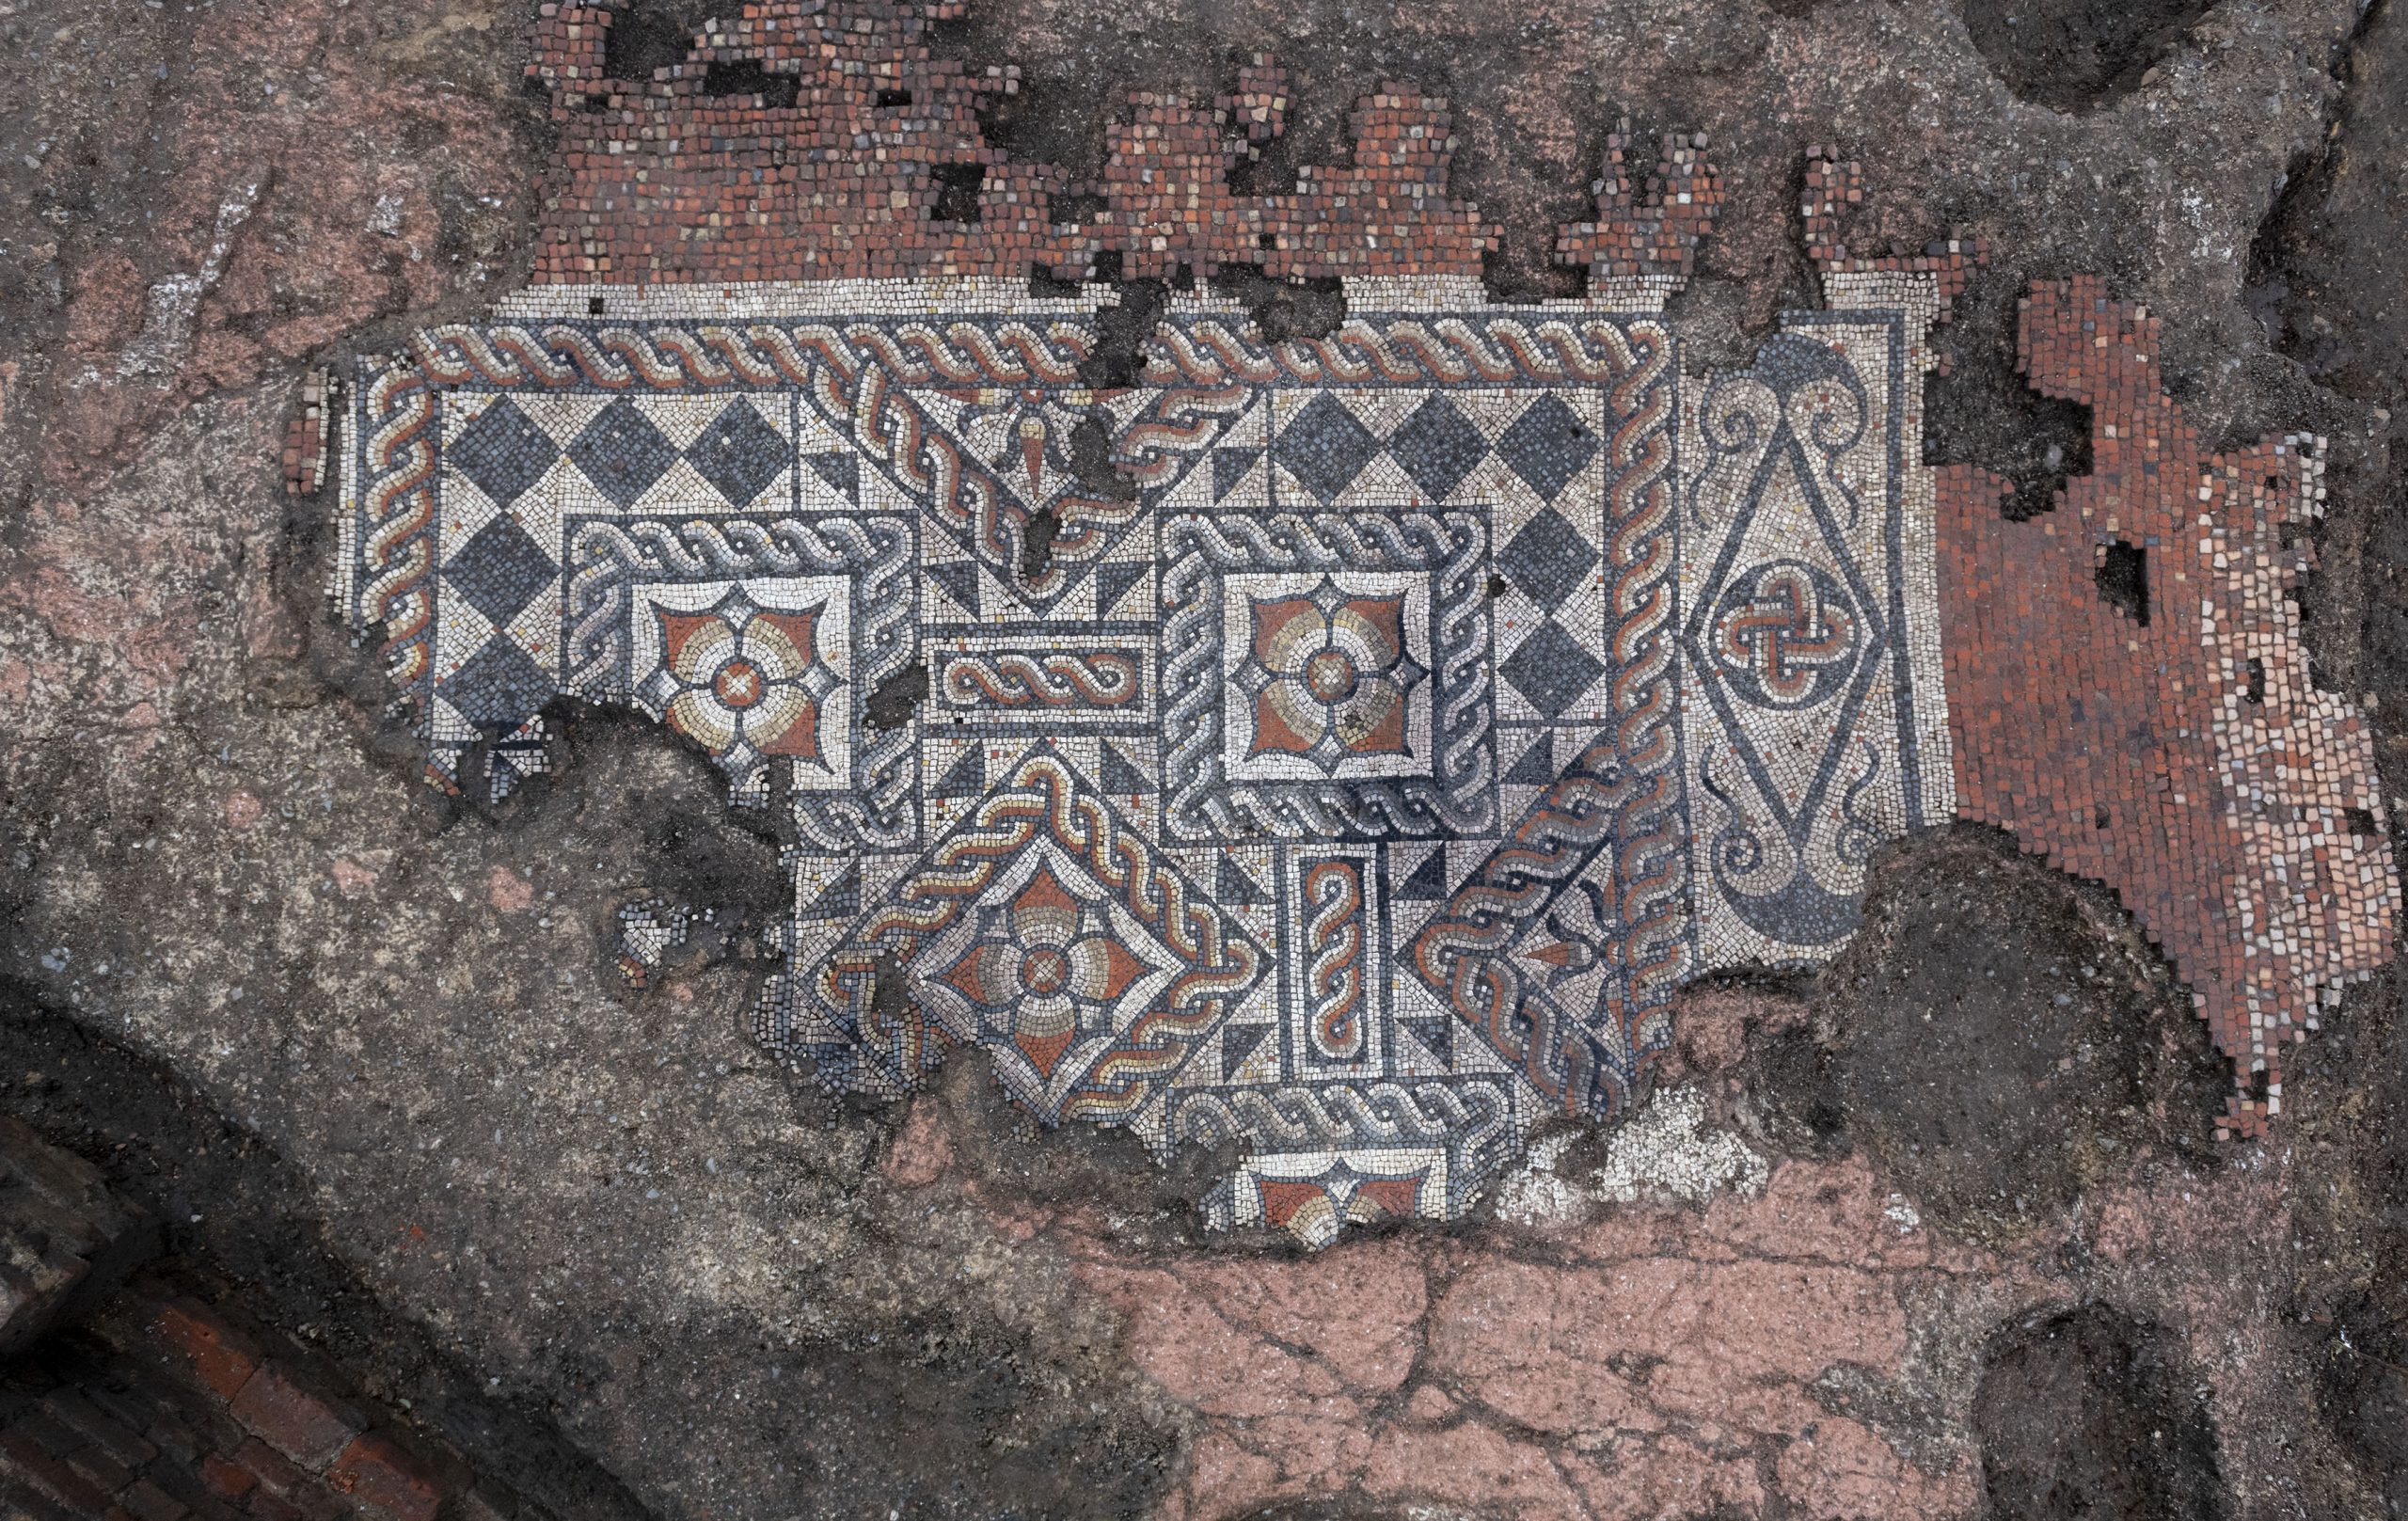 London's largest Roman mosaic discovered by archaeologists